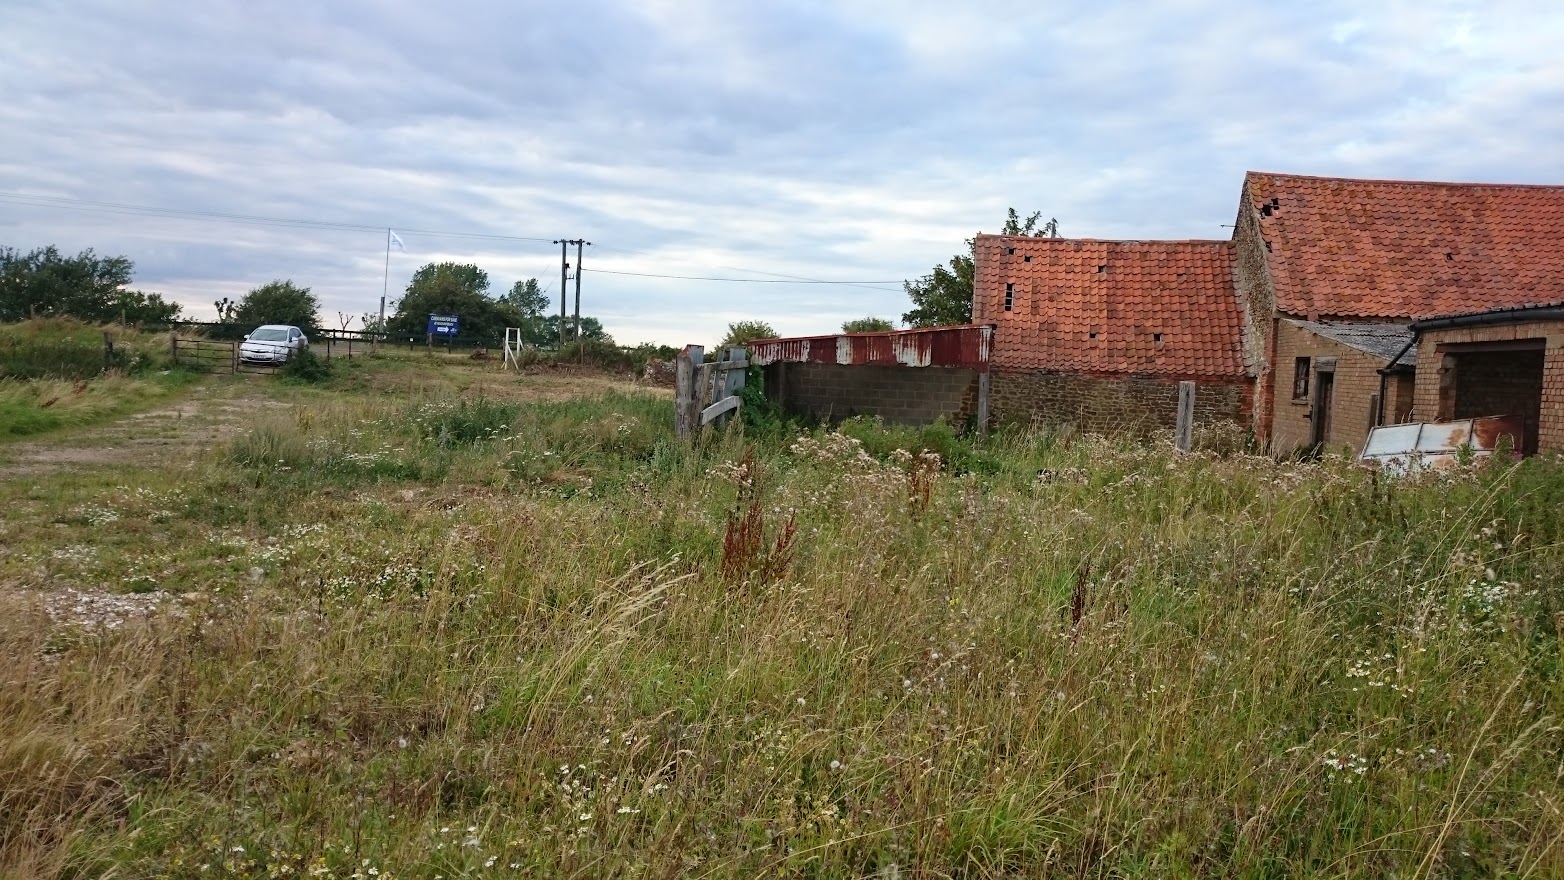 overgrown field with dilapidated farm buildings